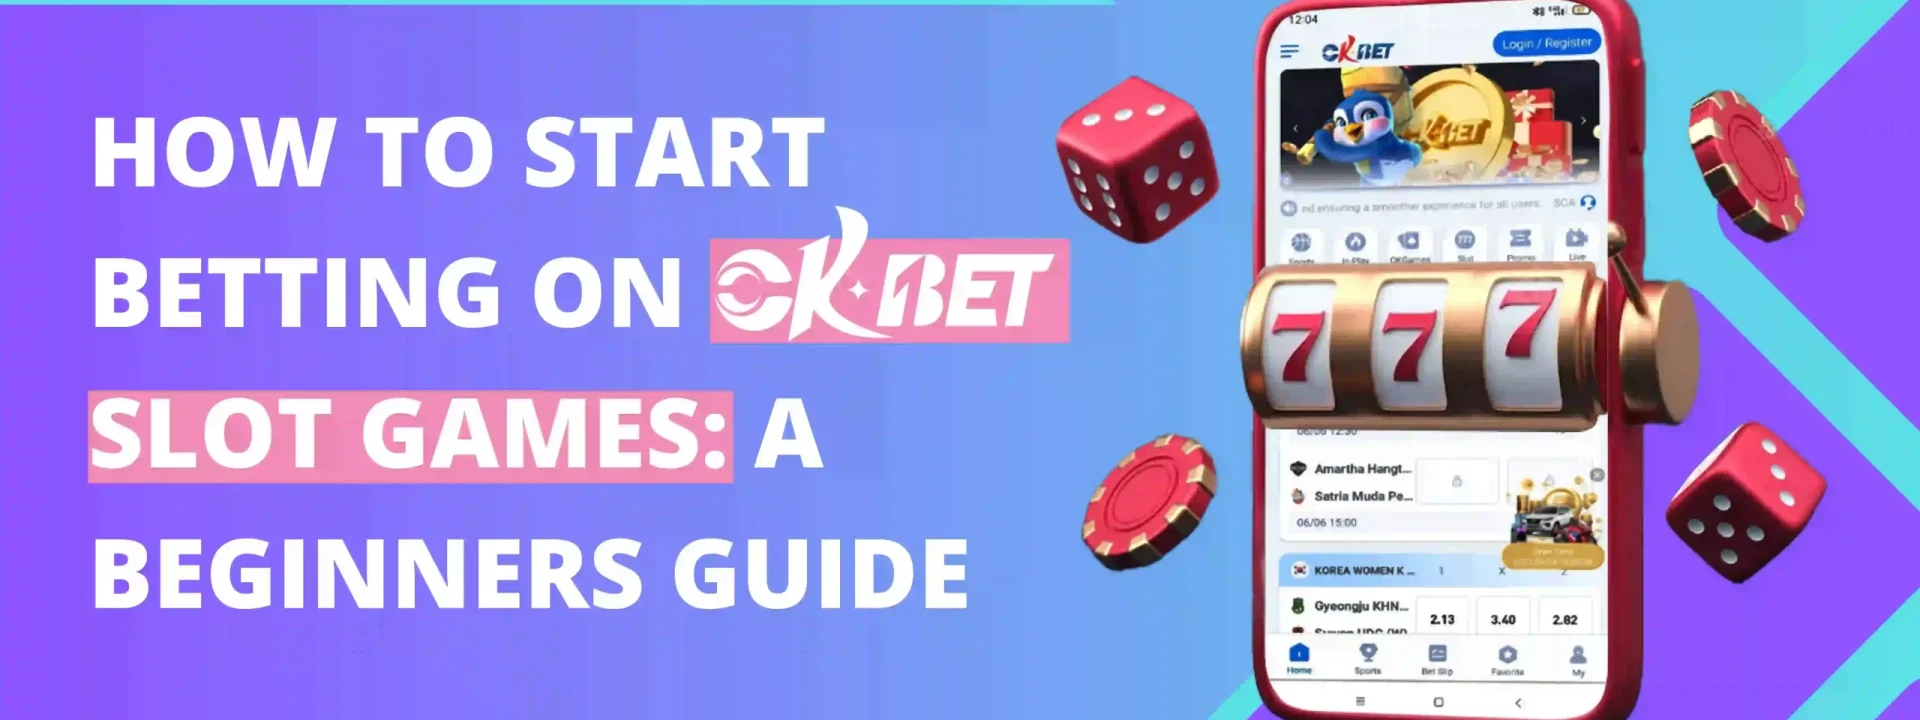 How To Start Betting On OKBet Slot Games: A Beginners Guide